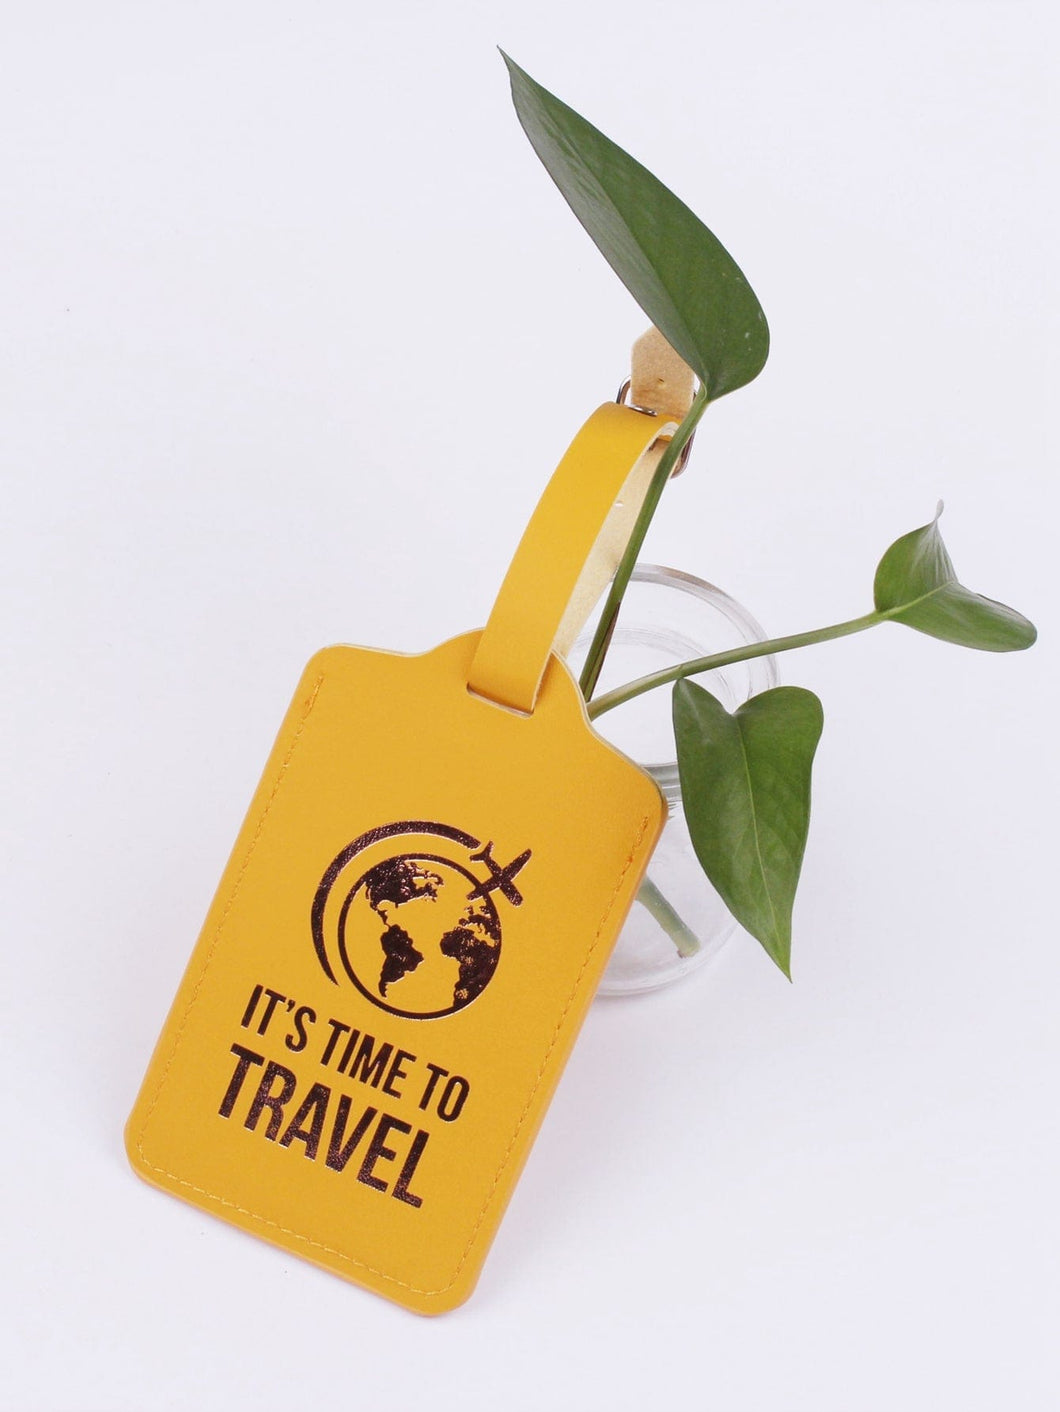 Time to travel luggage tag